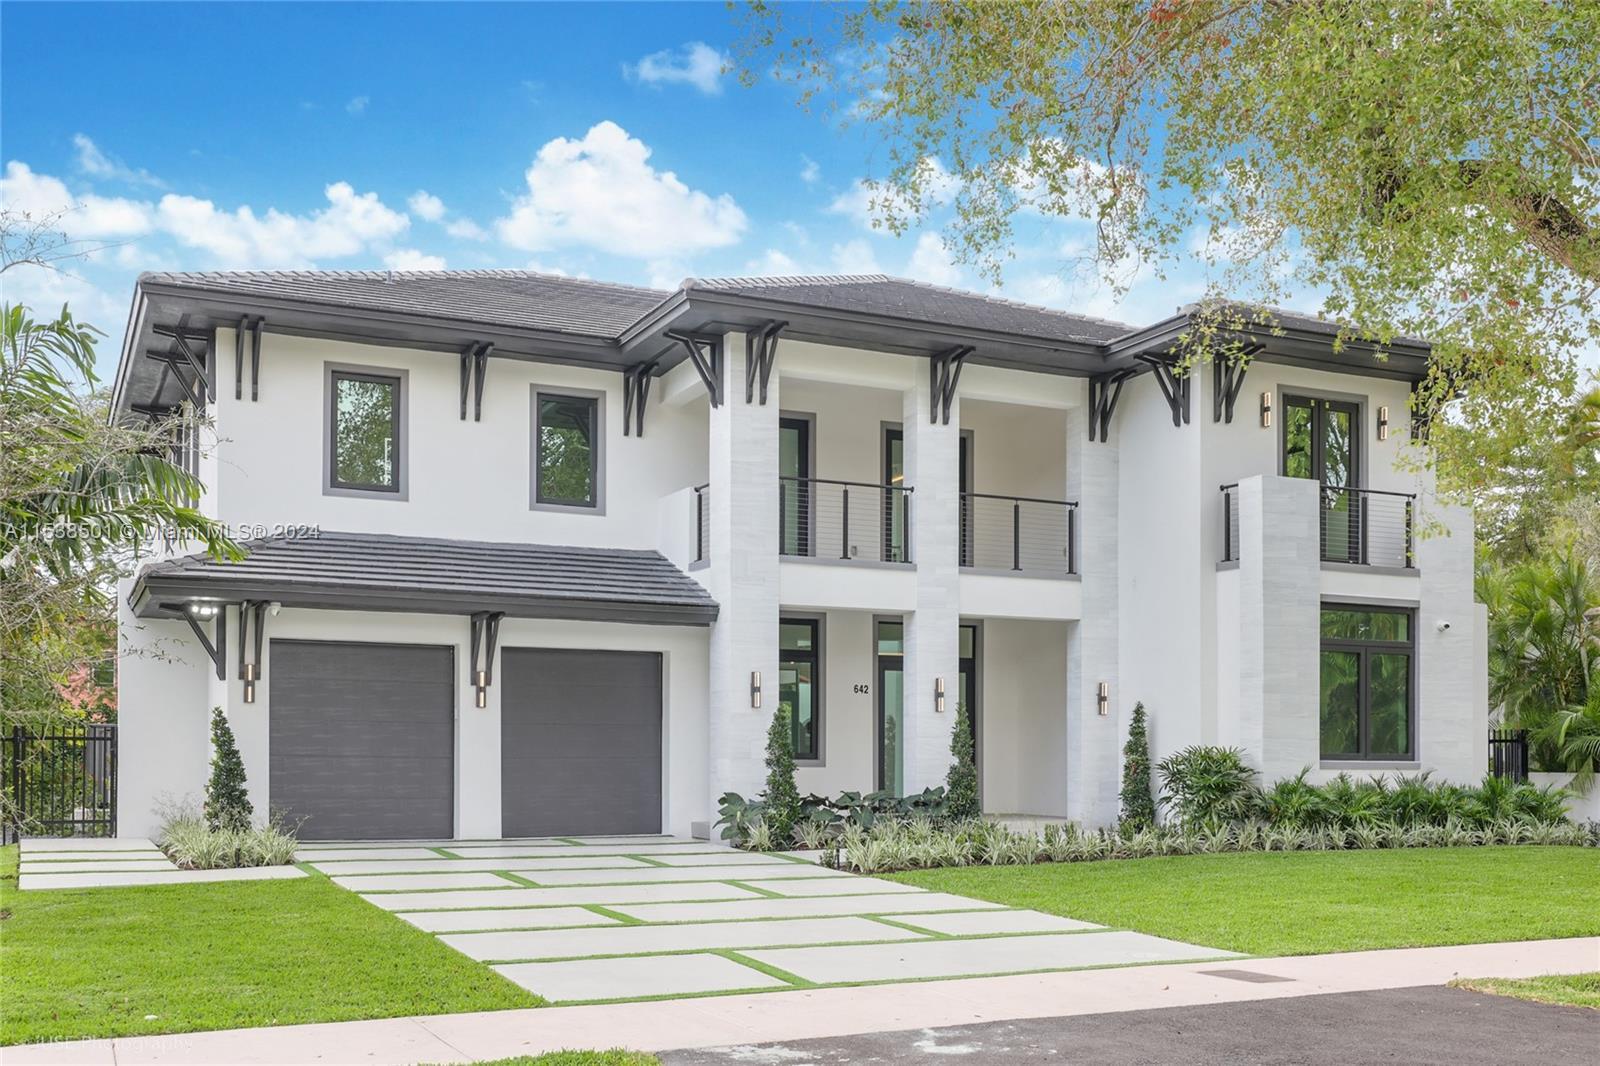 Photo of 642 Madeira Ave in Coral Gables, FL